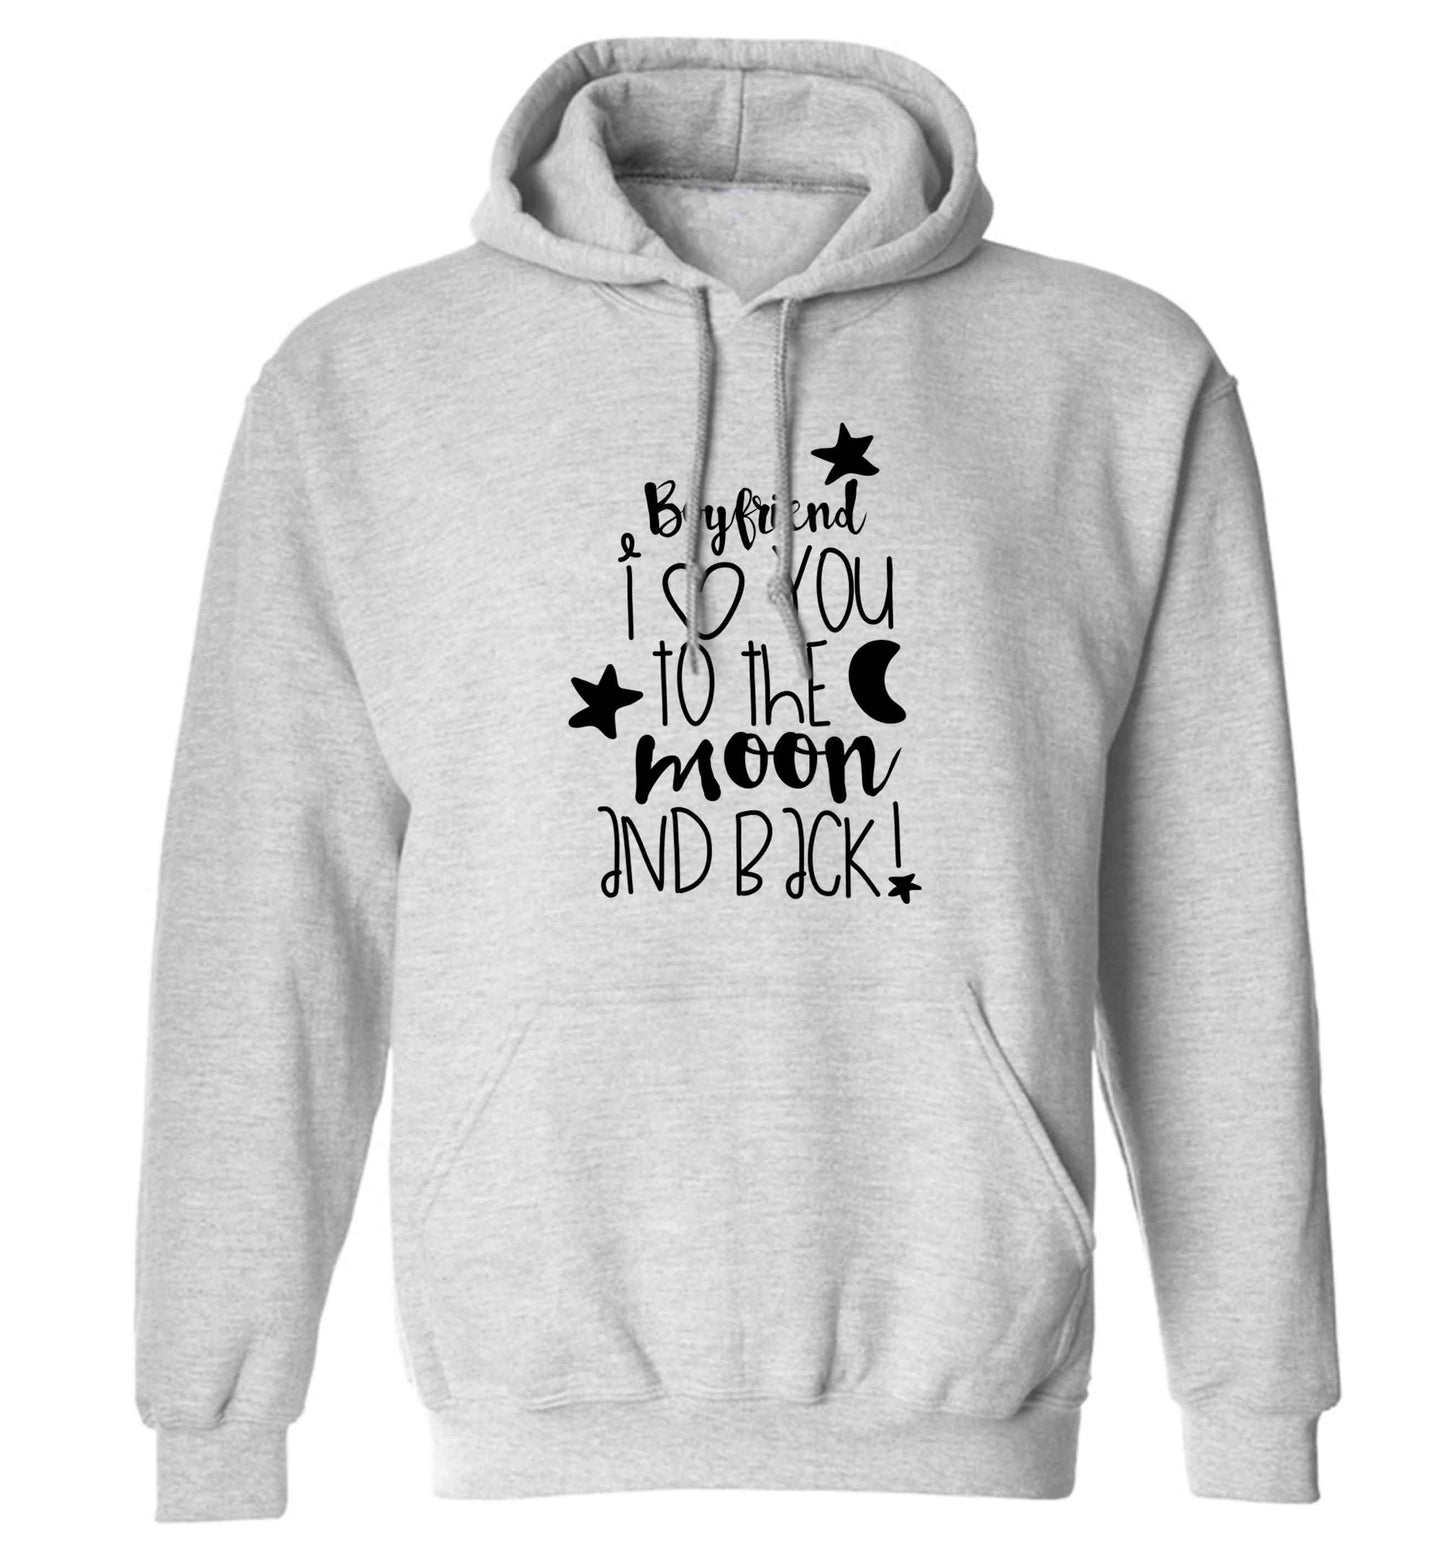 Boyfriend I love you to the moon and back adults unisex grey hoodie 2XL